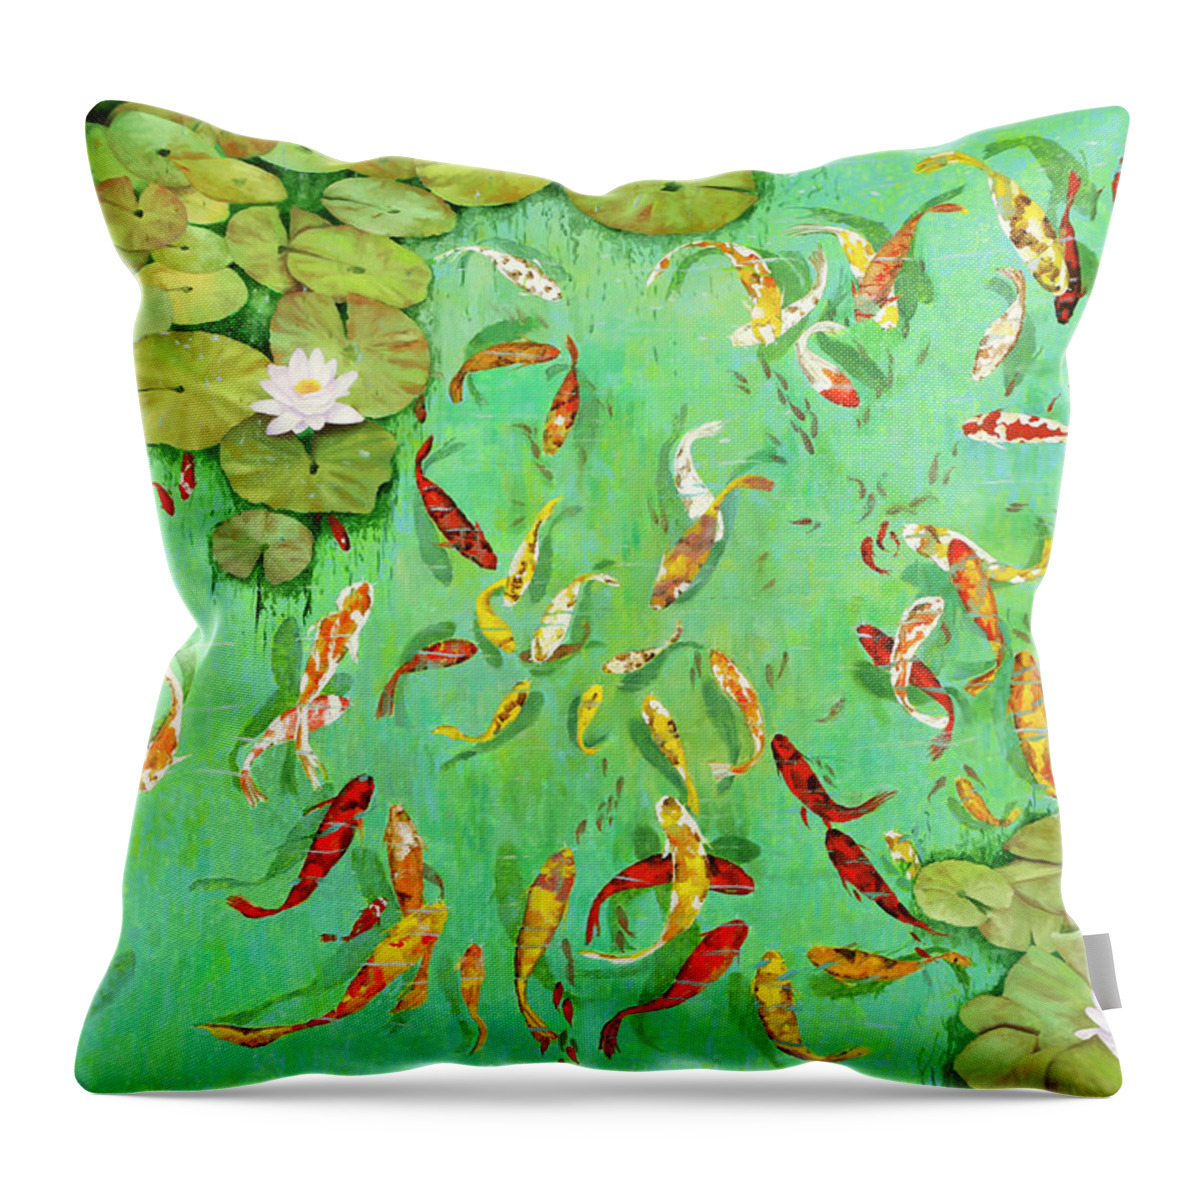 Koi Throw Pillow featuring the painting Koiscape by Guido Borelli